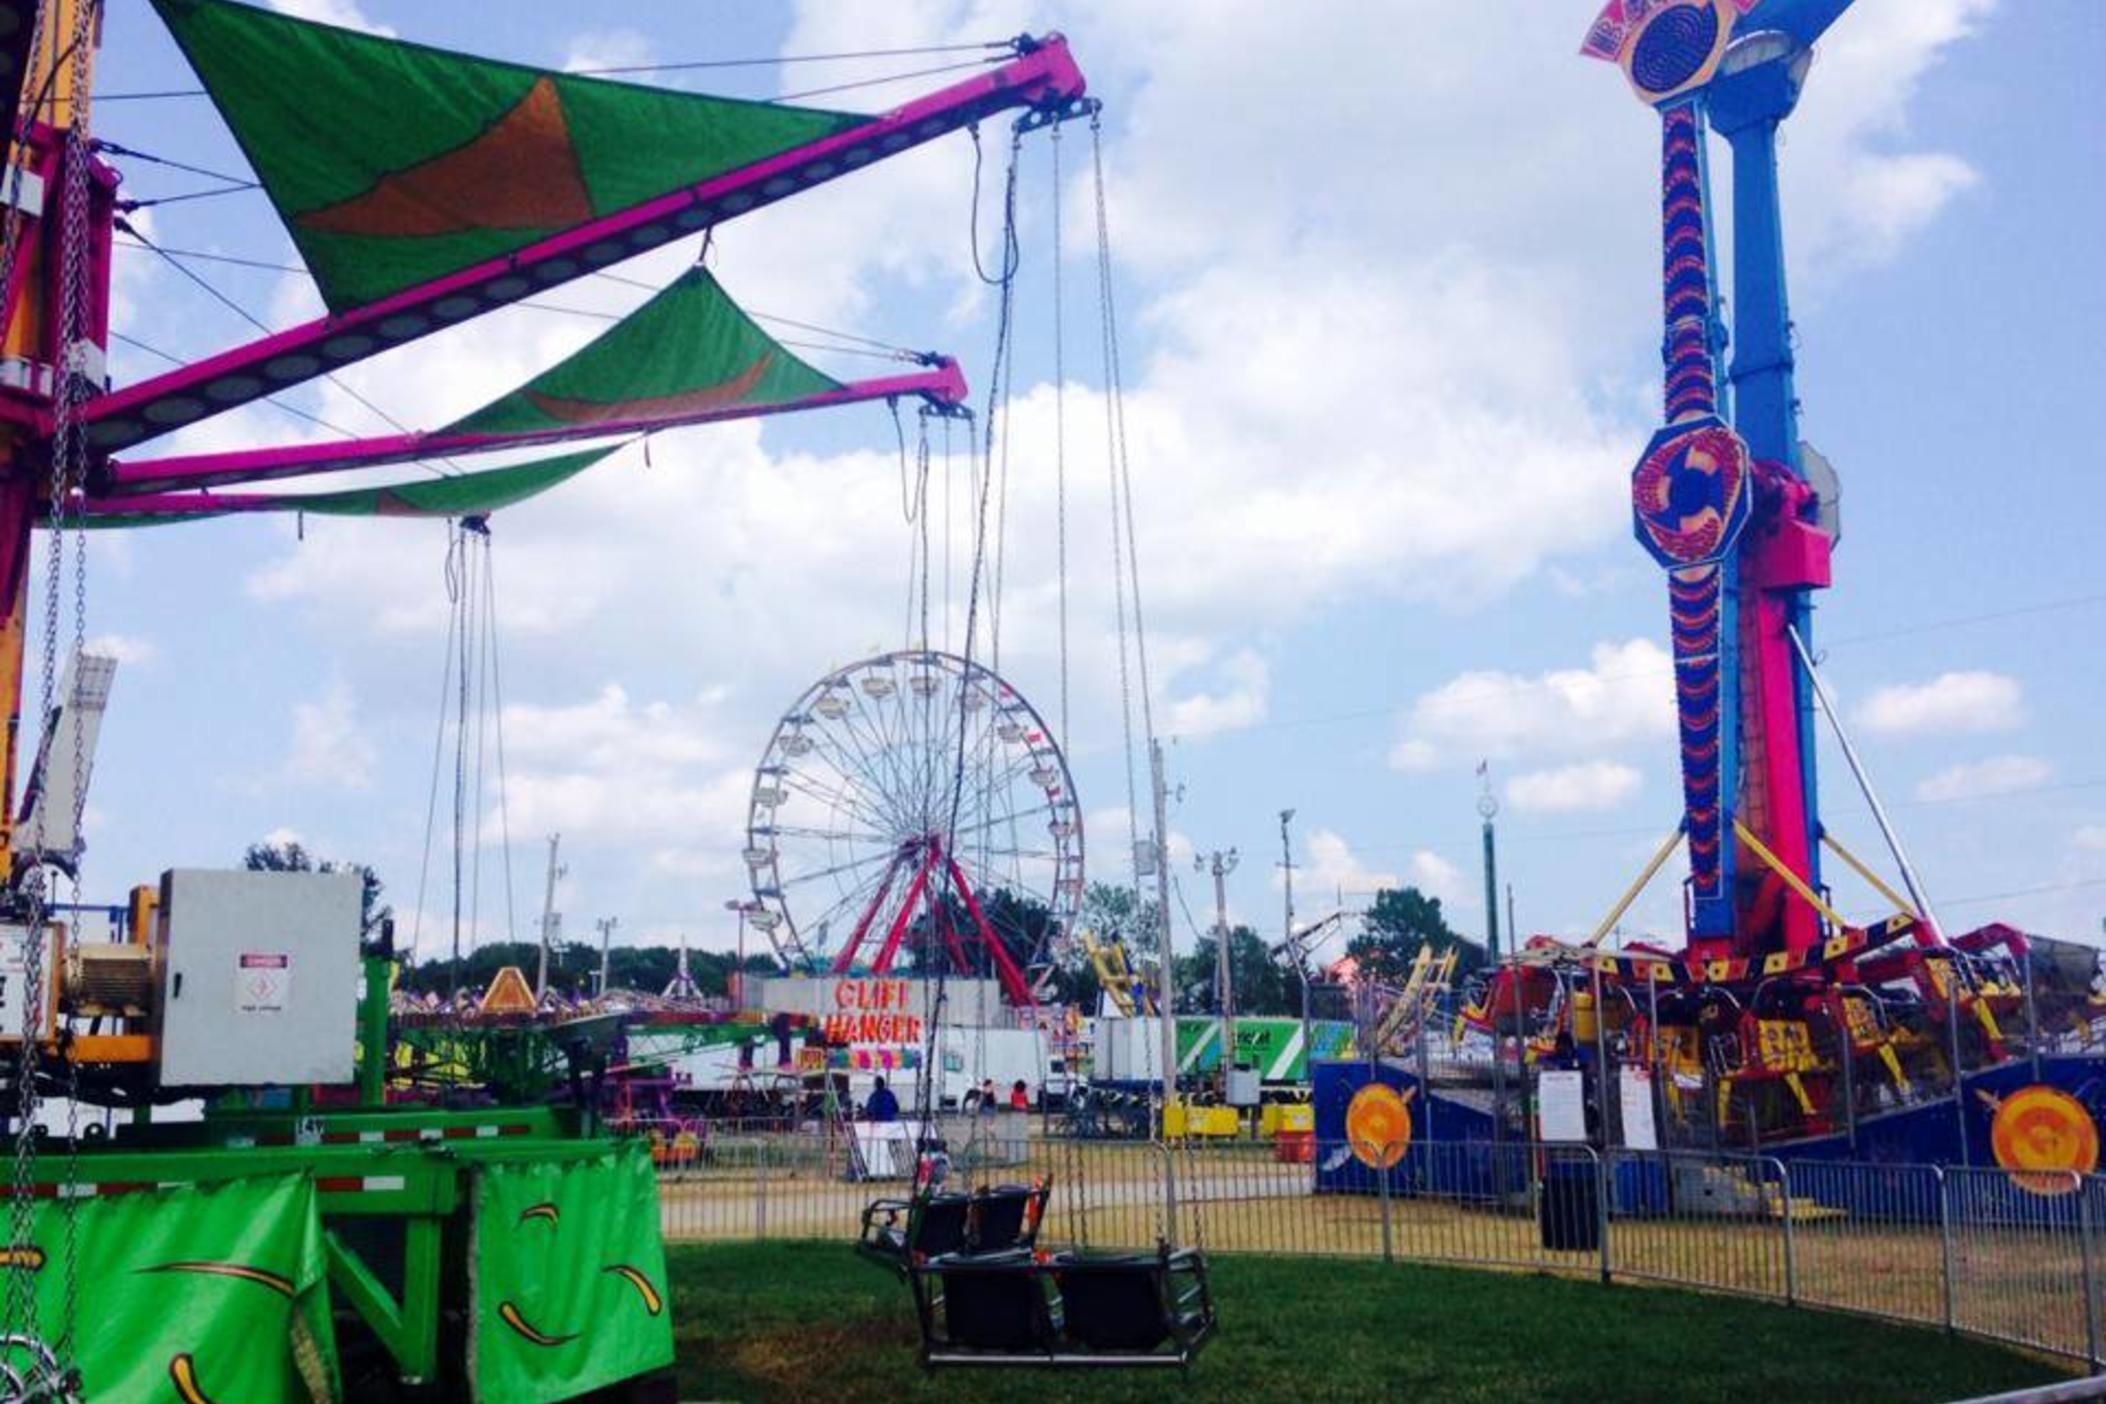 The Georgia State Fair will be held Oct. 2 to 11.